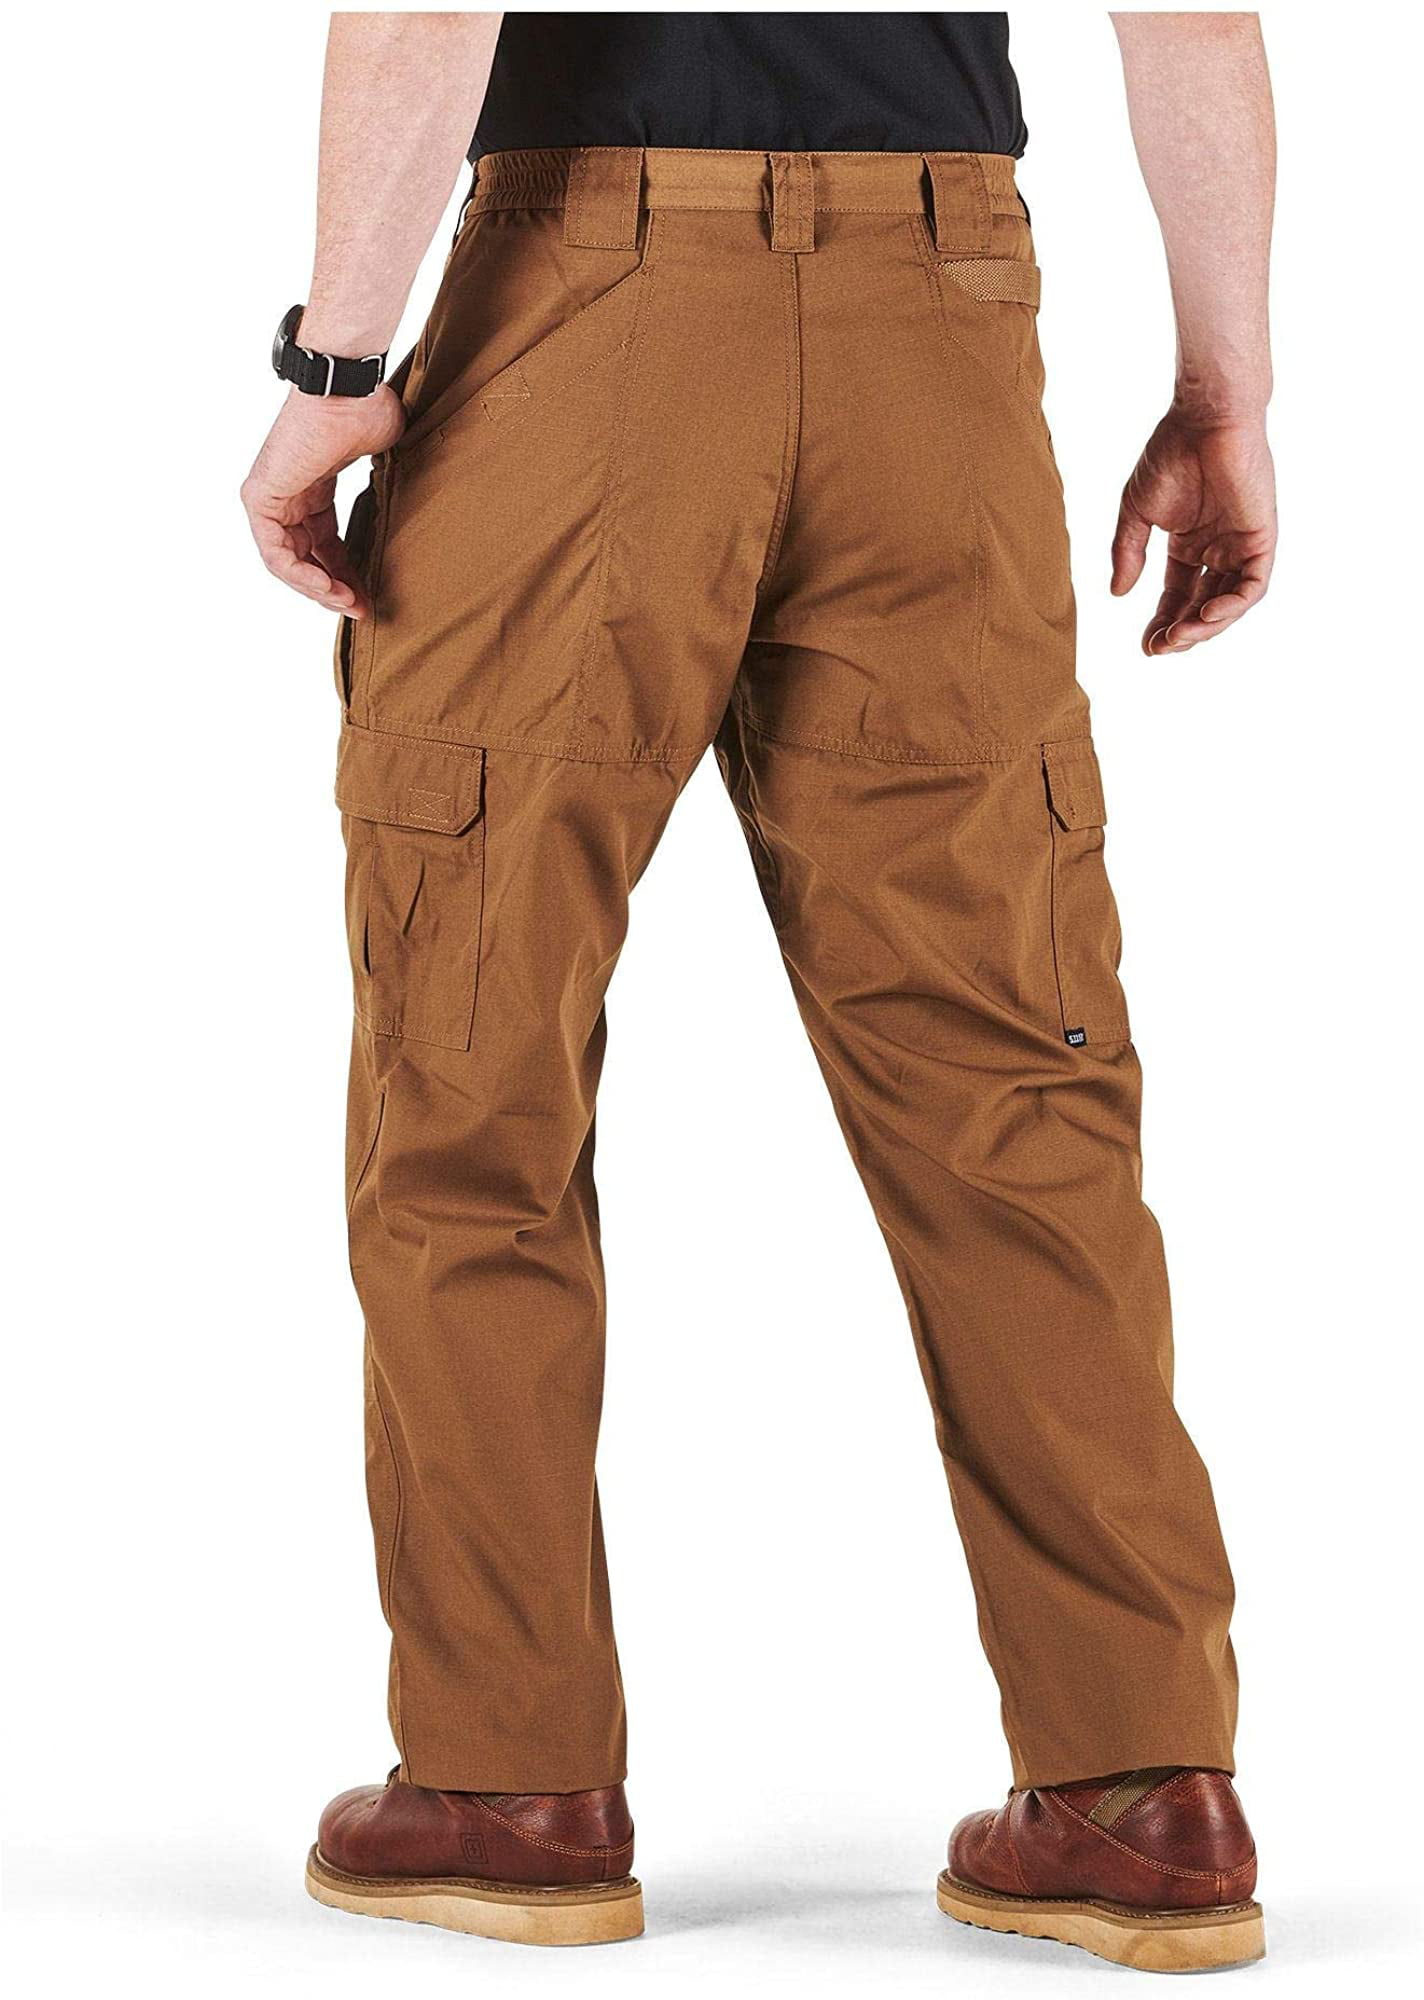 Cargo Pockets Style 74273 Action Waistband 5.11 Tactical Men's Taclite Pro Lightweight Performance Pants